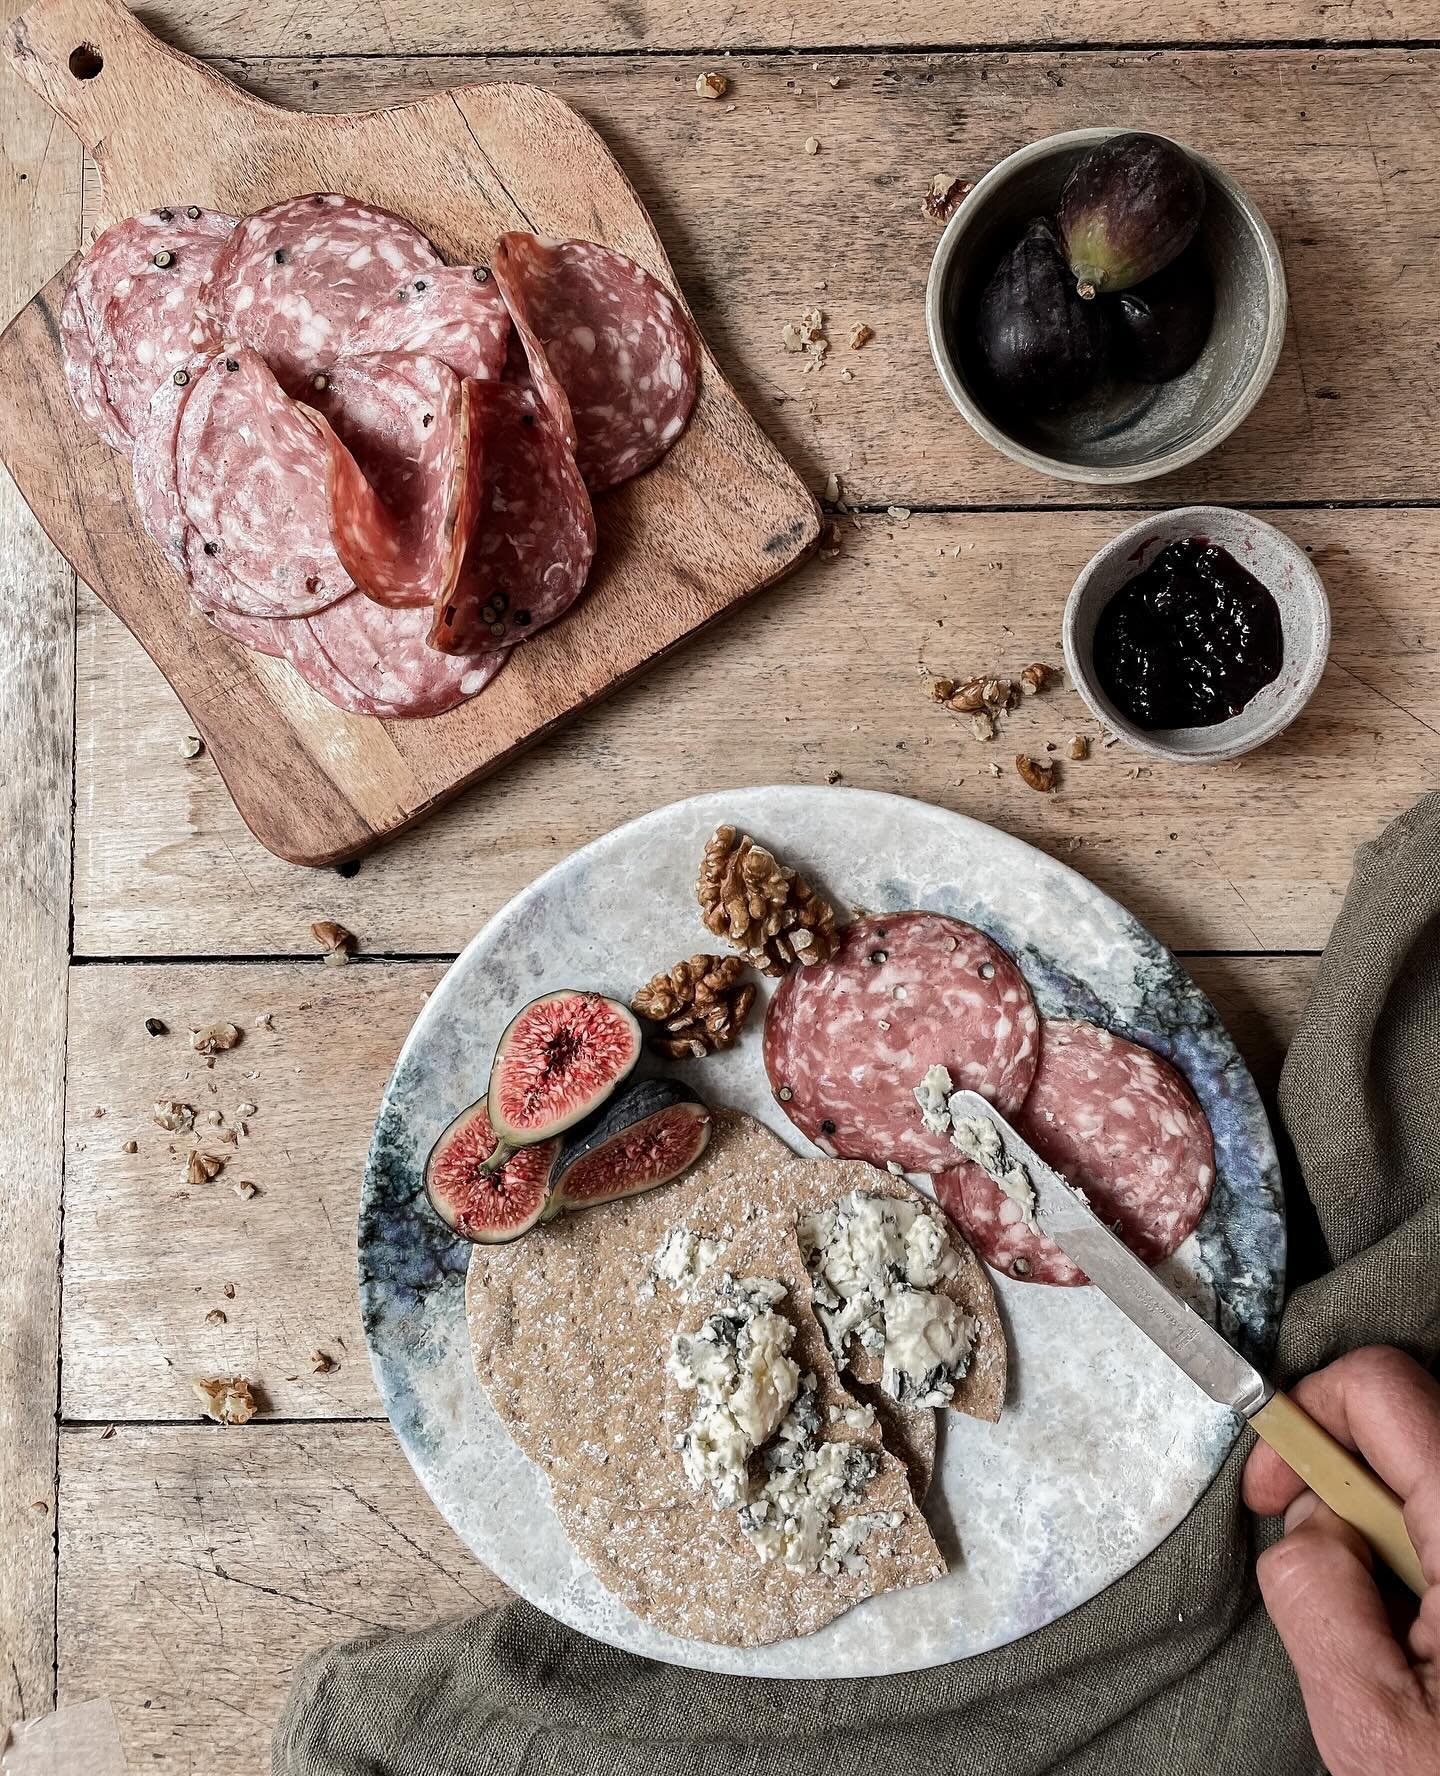 Lunchtime 🦌🧀🍇&rdquo;

Let&rsquo;s elevate lunchtime with a taste from the wild! 🌿🕛 

What about this tempting platter boasting slices of wild venison salami, paired with rich blue cheese, zesty chutney, and luscious figs. It&rsquo;s a flavour ad